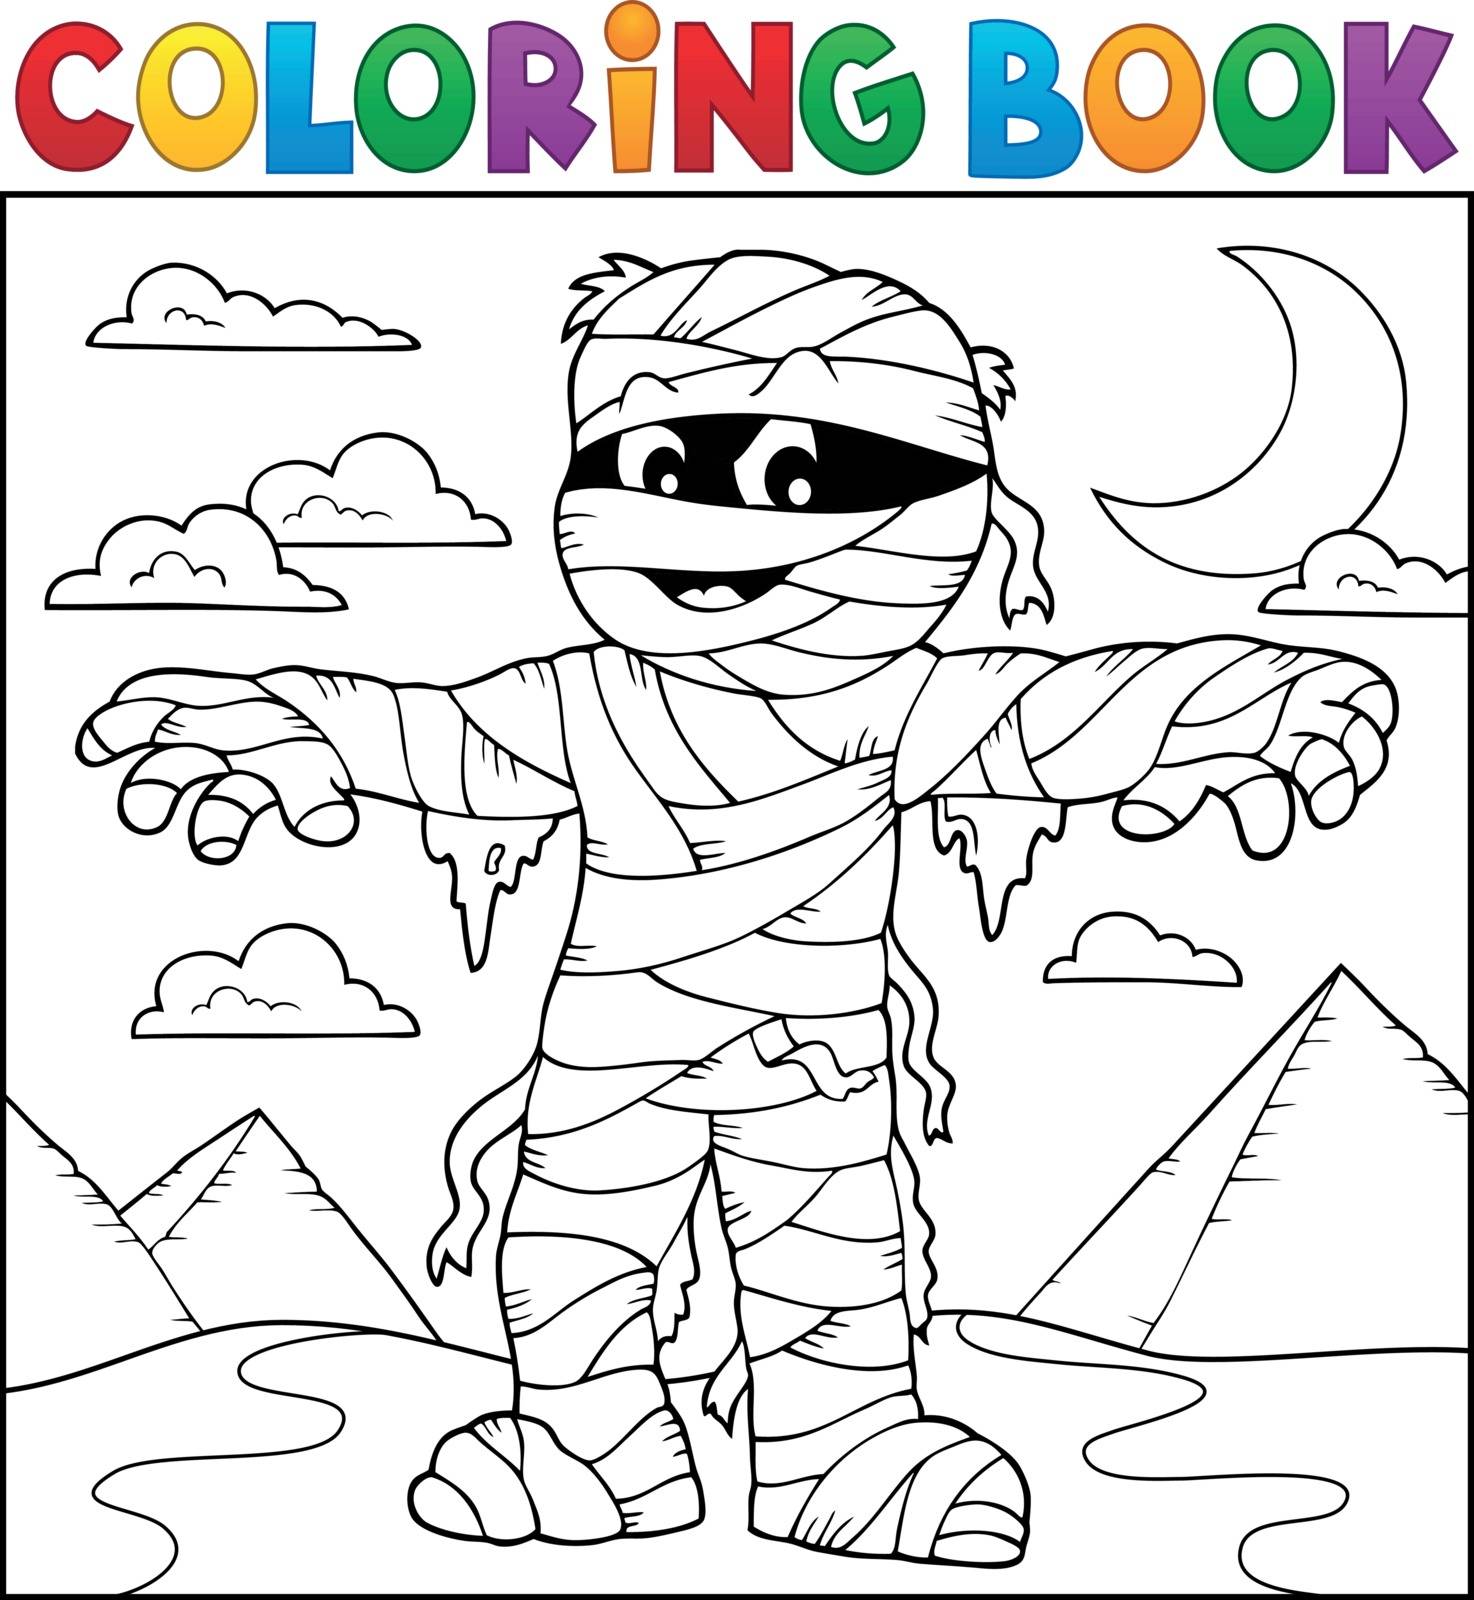 Coloring book mummy theme 2 - eps10 vector illustration.